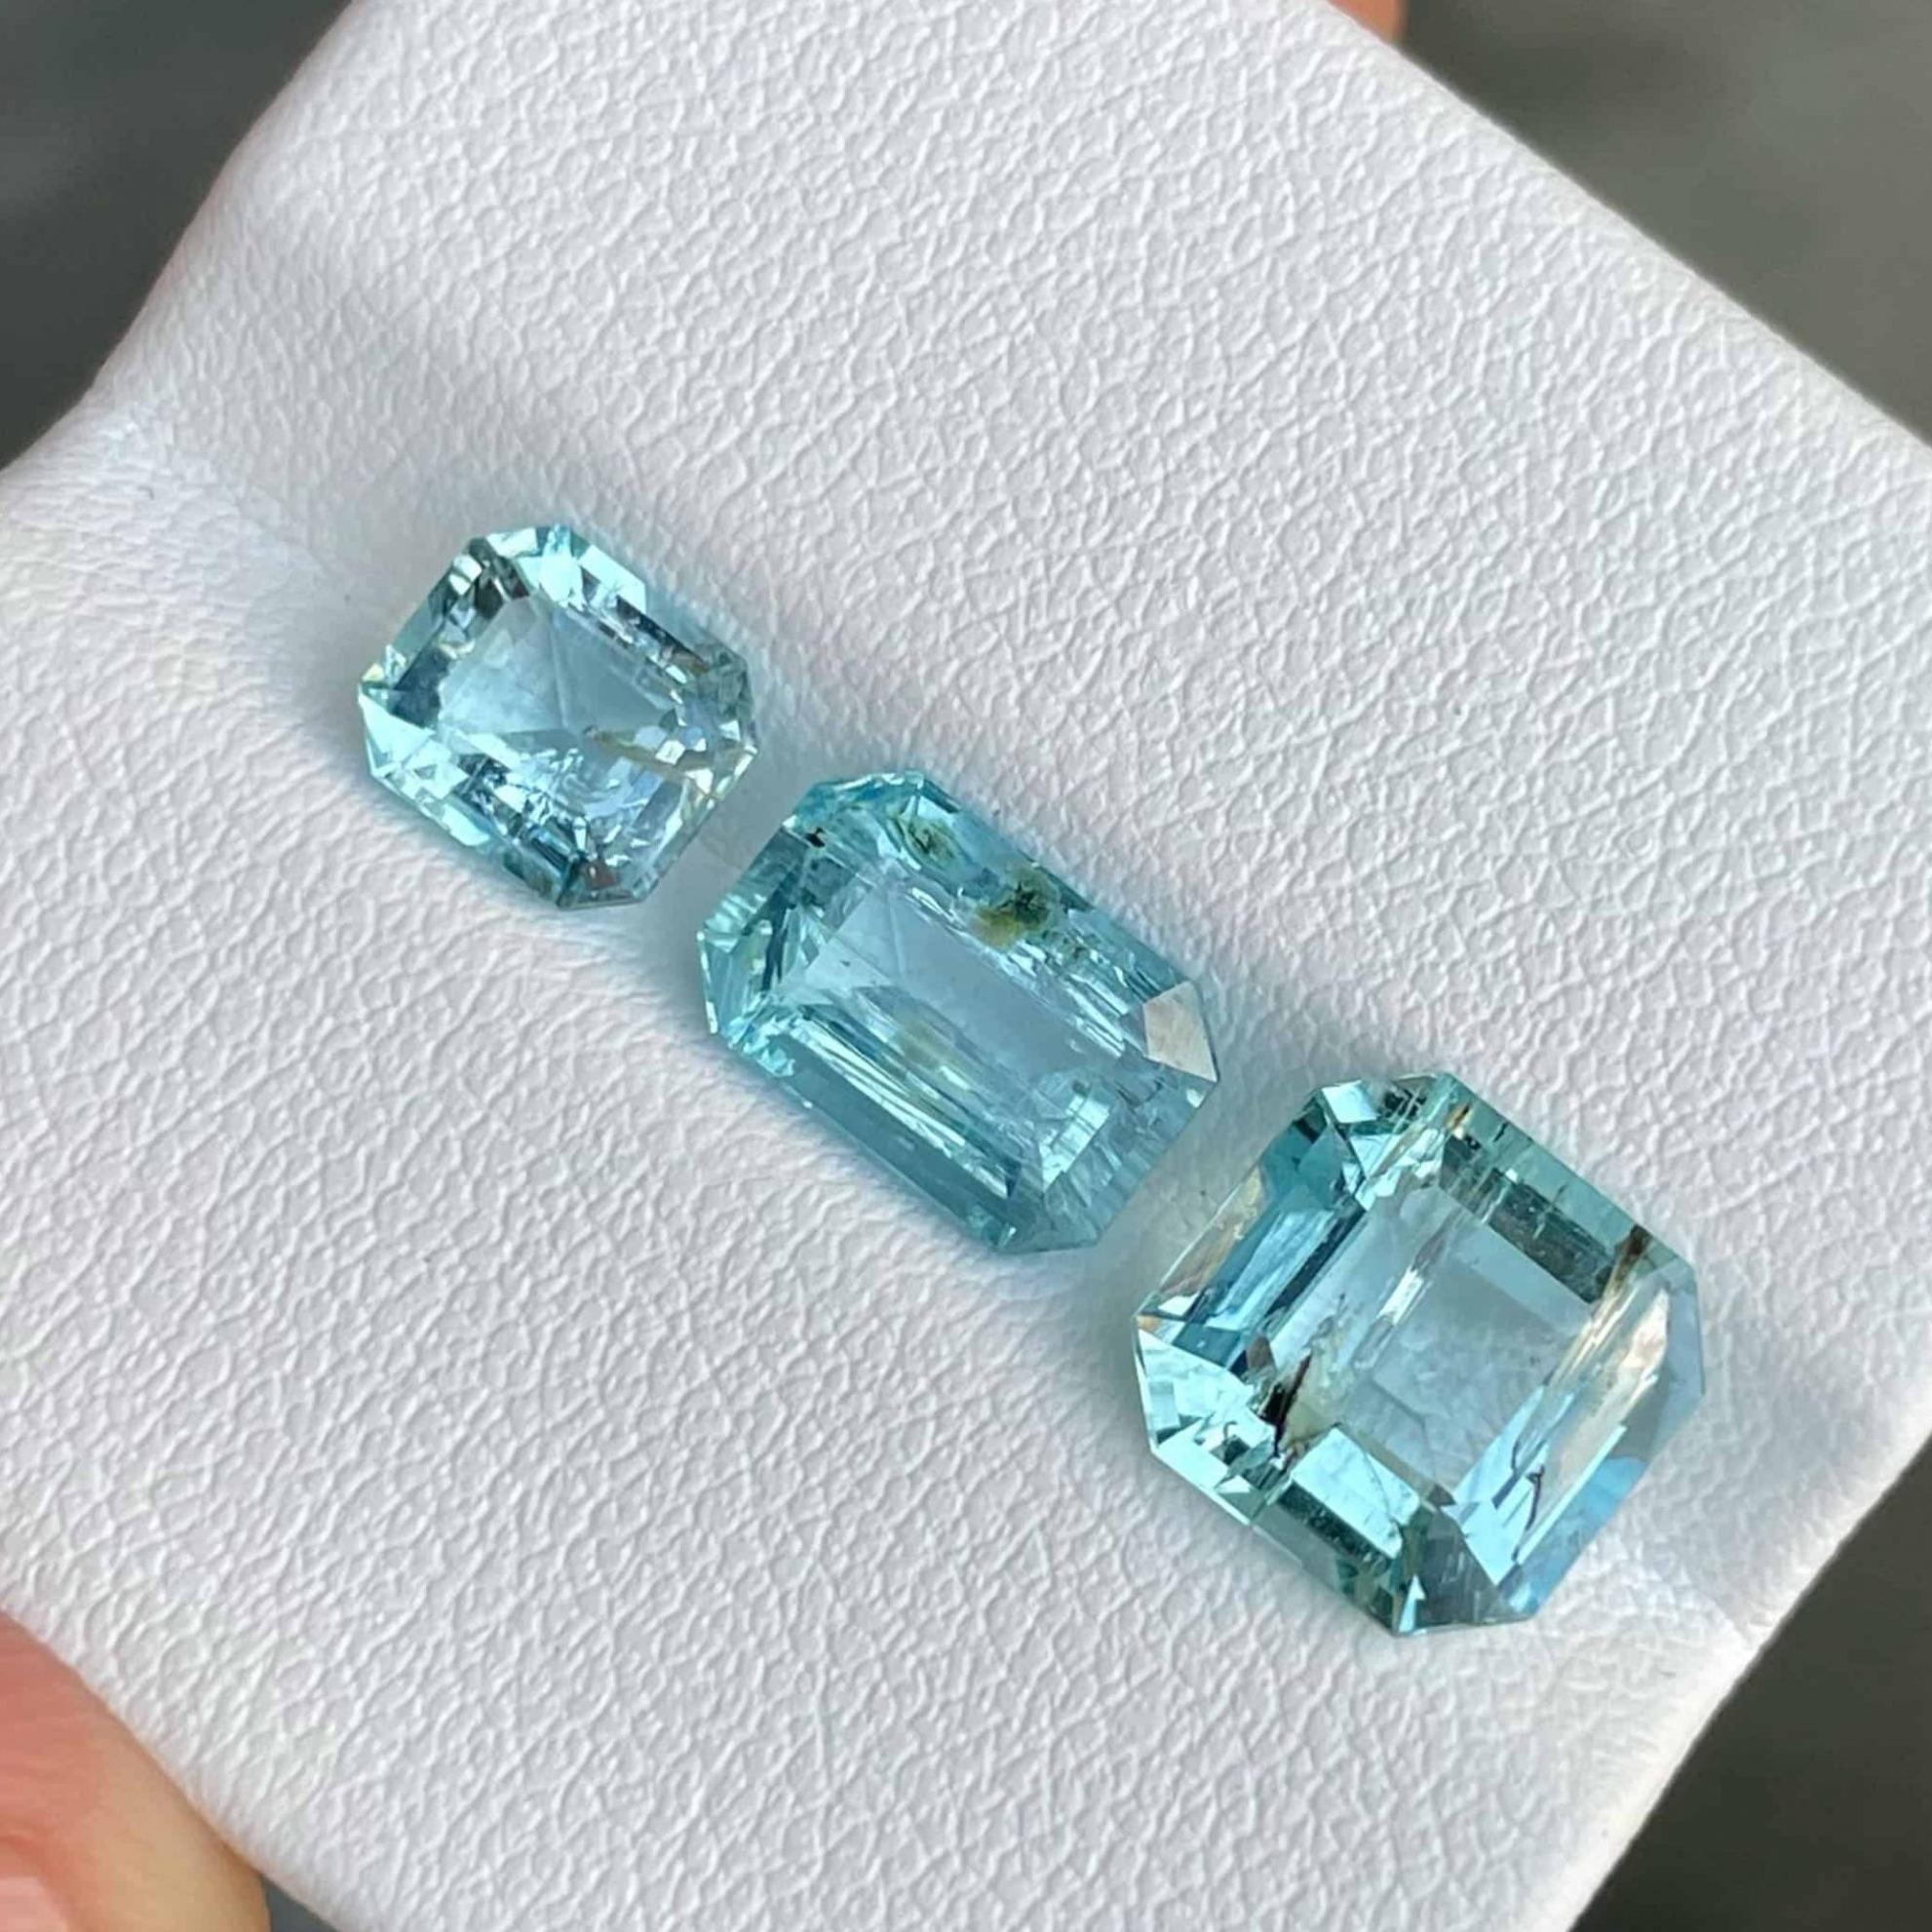 Modern 5.96 carats Deep Blue Color Natural Aquamarine Batch Loose Gemstone From Namibia For Sale